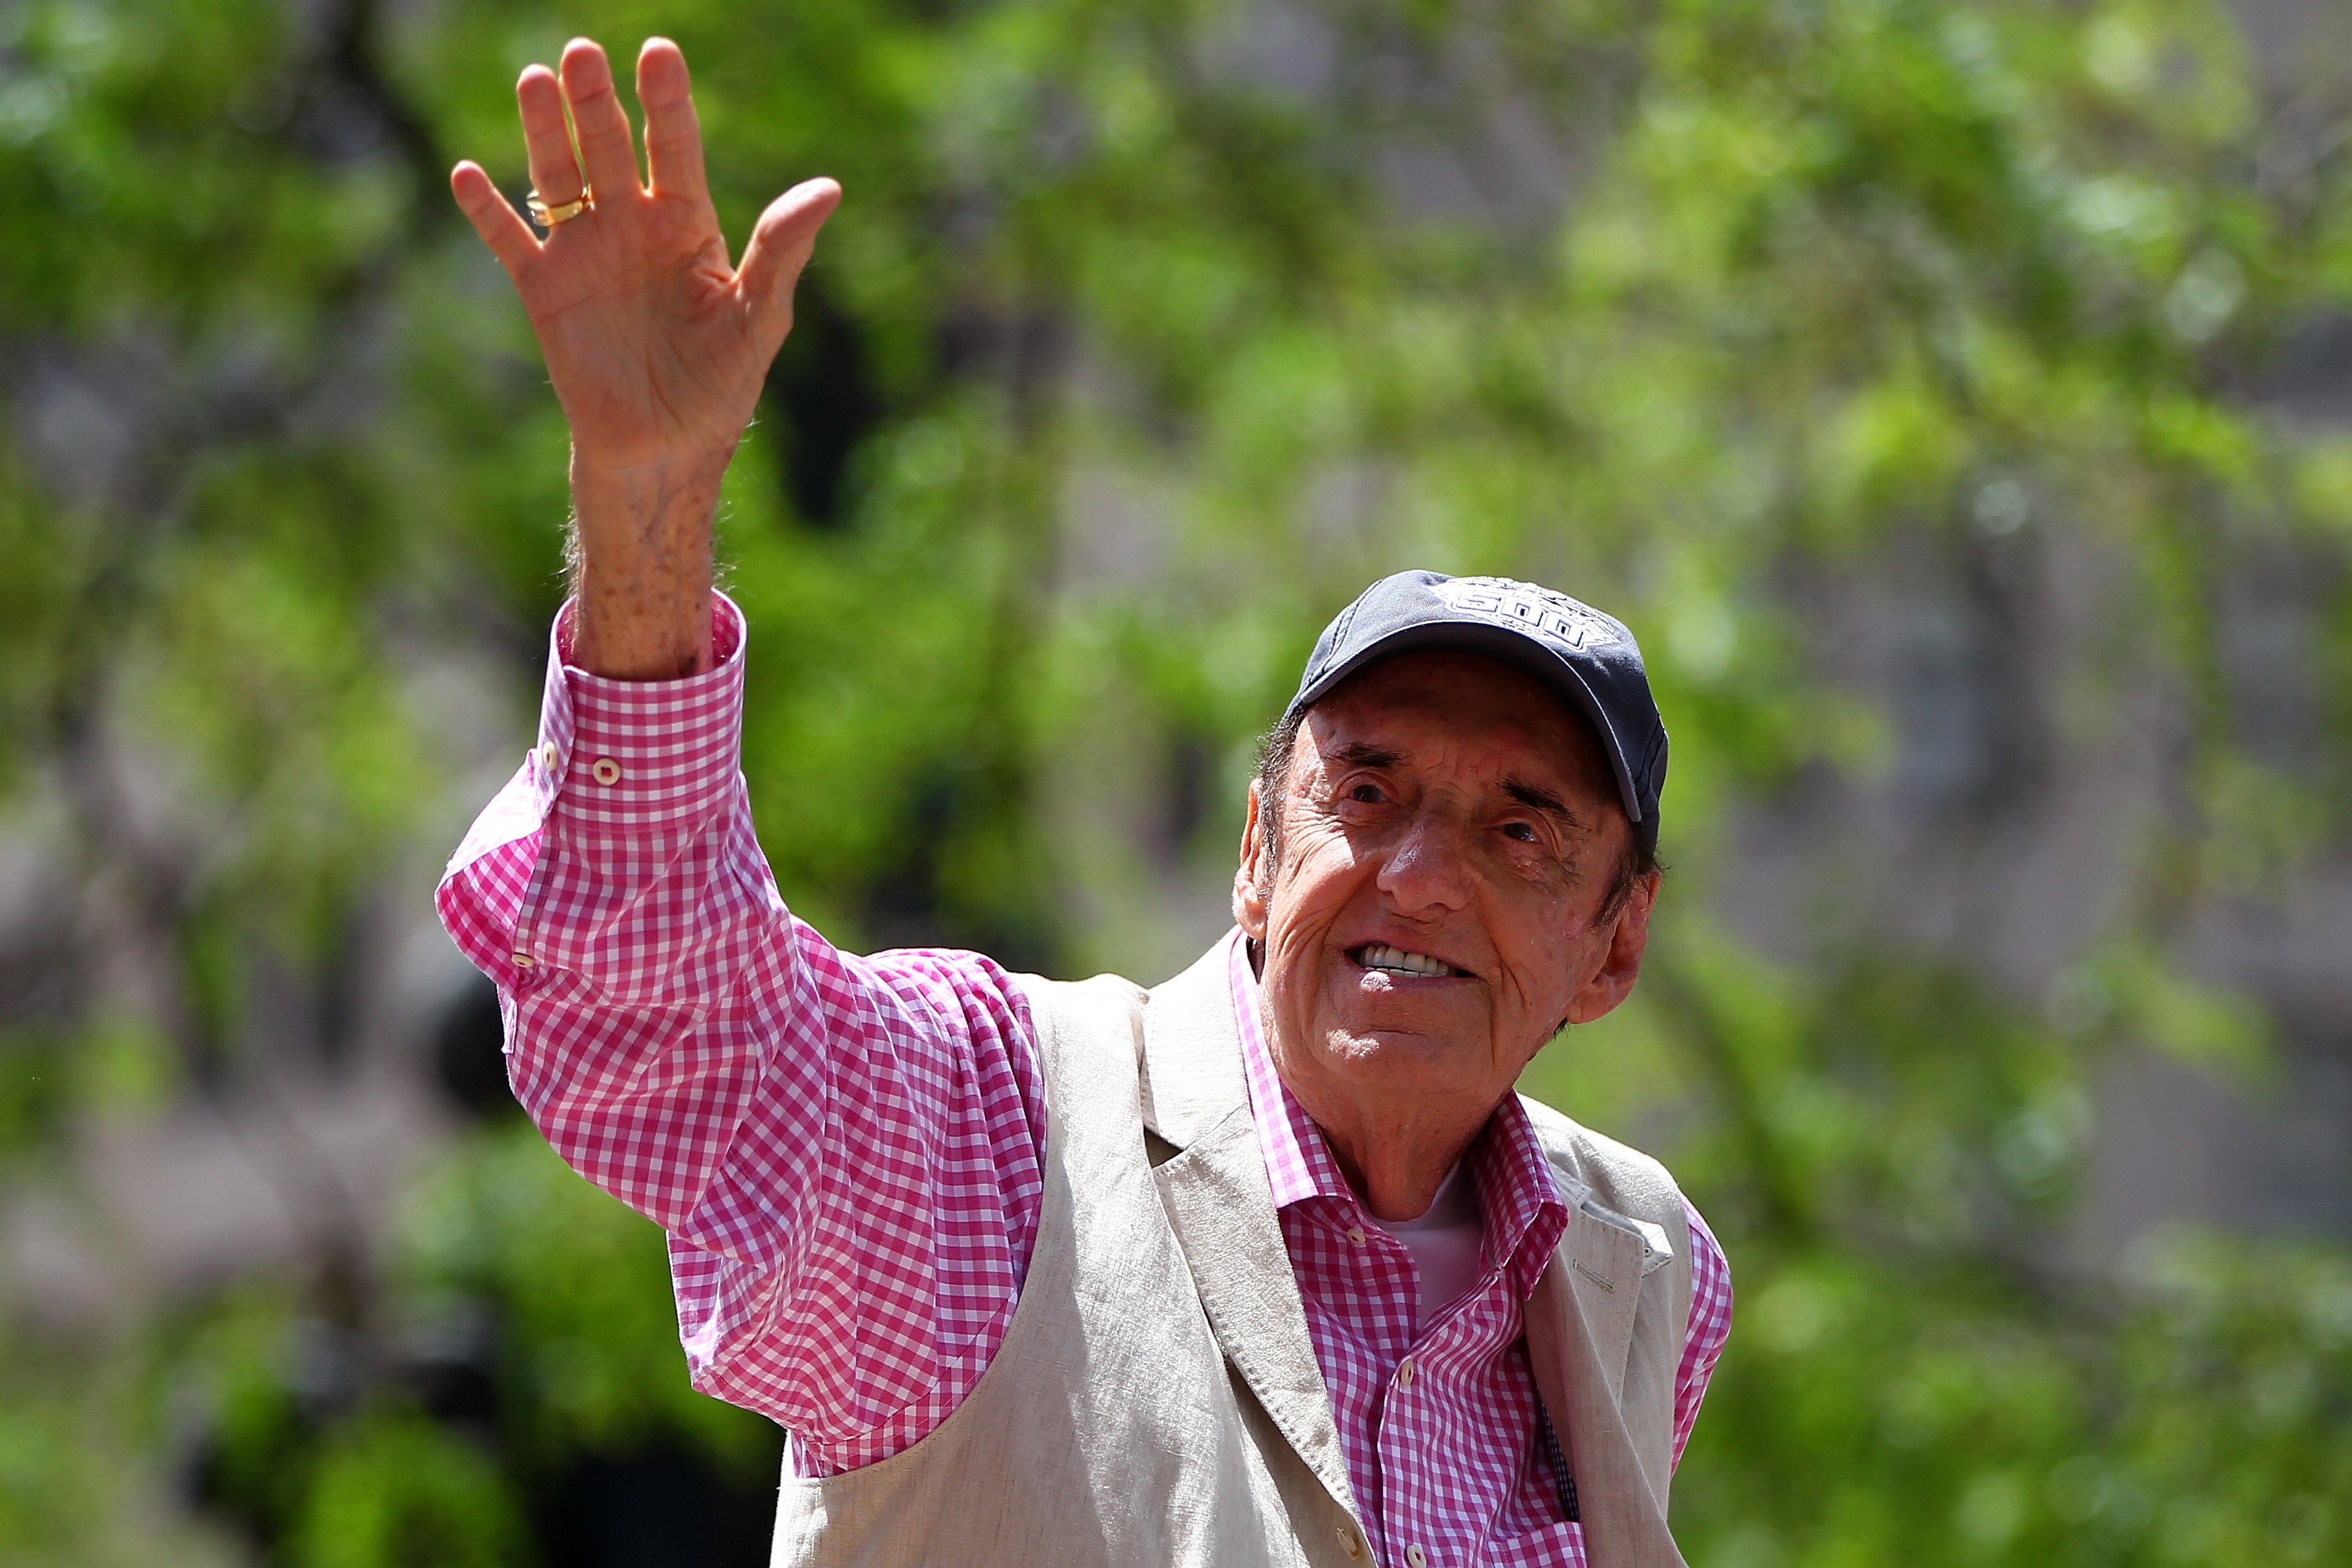 Jim Nabors waves to the crowd during the Indianapolis 500 parade on May 24, 2014 | Source: Getty Images